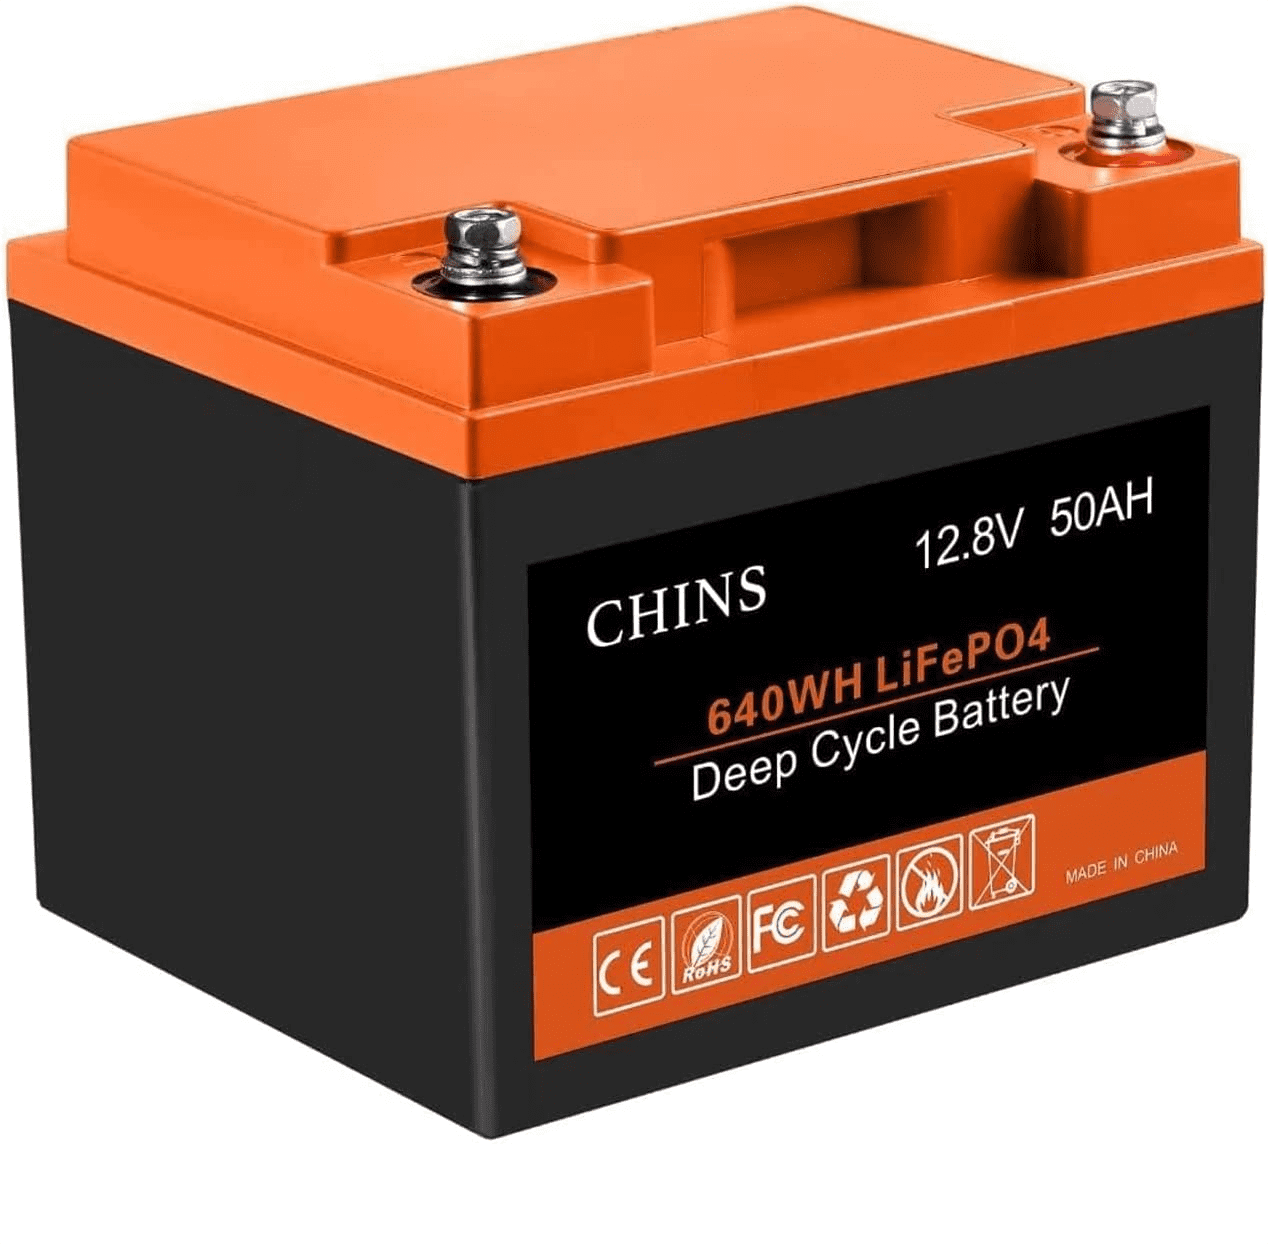 CHINS Lithium Iron 12V 50Ah LiFePO4 Battery, Built-in 50A BMS for